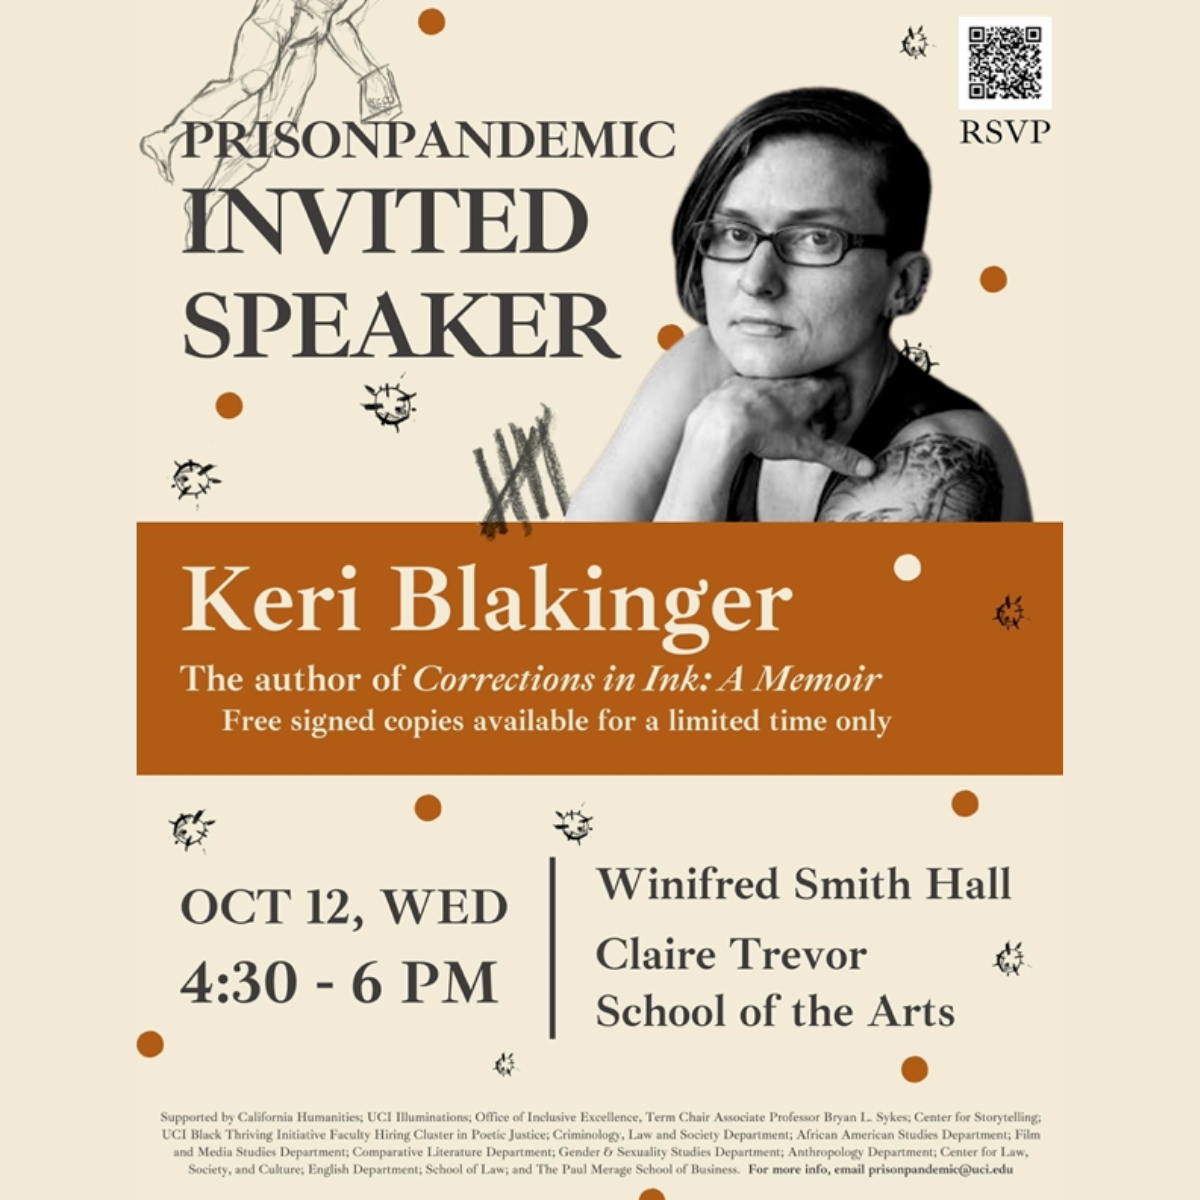 Prison Pandemic exhibit presents invited speaker Keri Blakinger, author of 'Corrections in Ink: A Memoir,' from 4:30-6 p.m. Wed., 10/12, in @UCIrvine @CTSA_UCIrvine's Winifred Smith Hall. Free signed books will be available for a limited time. bit.ly/3Dn9yzp